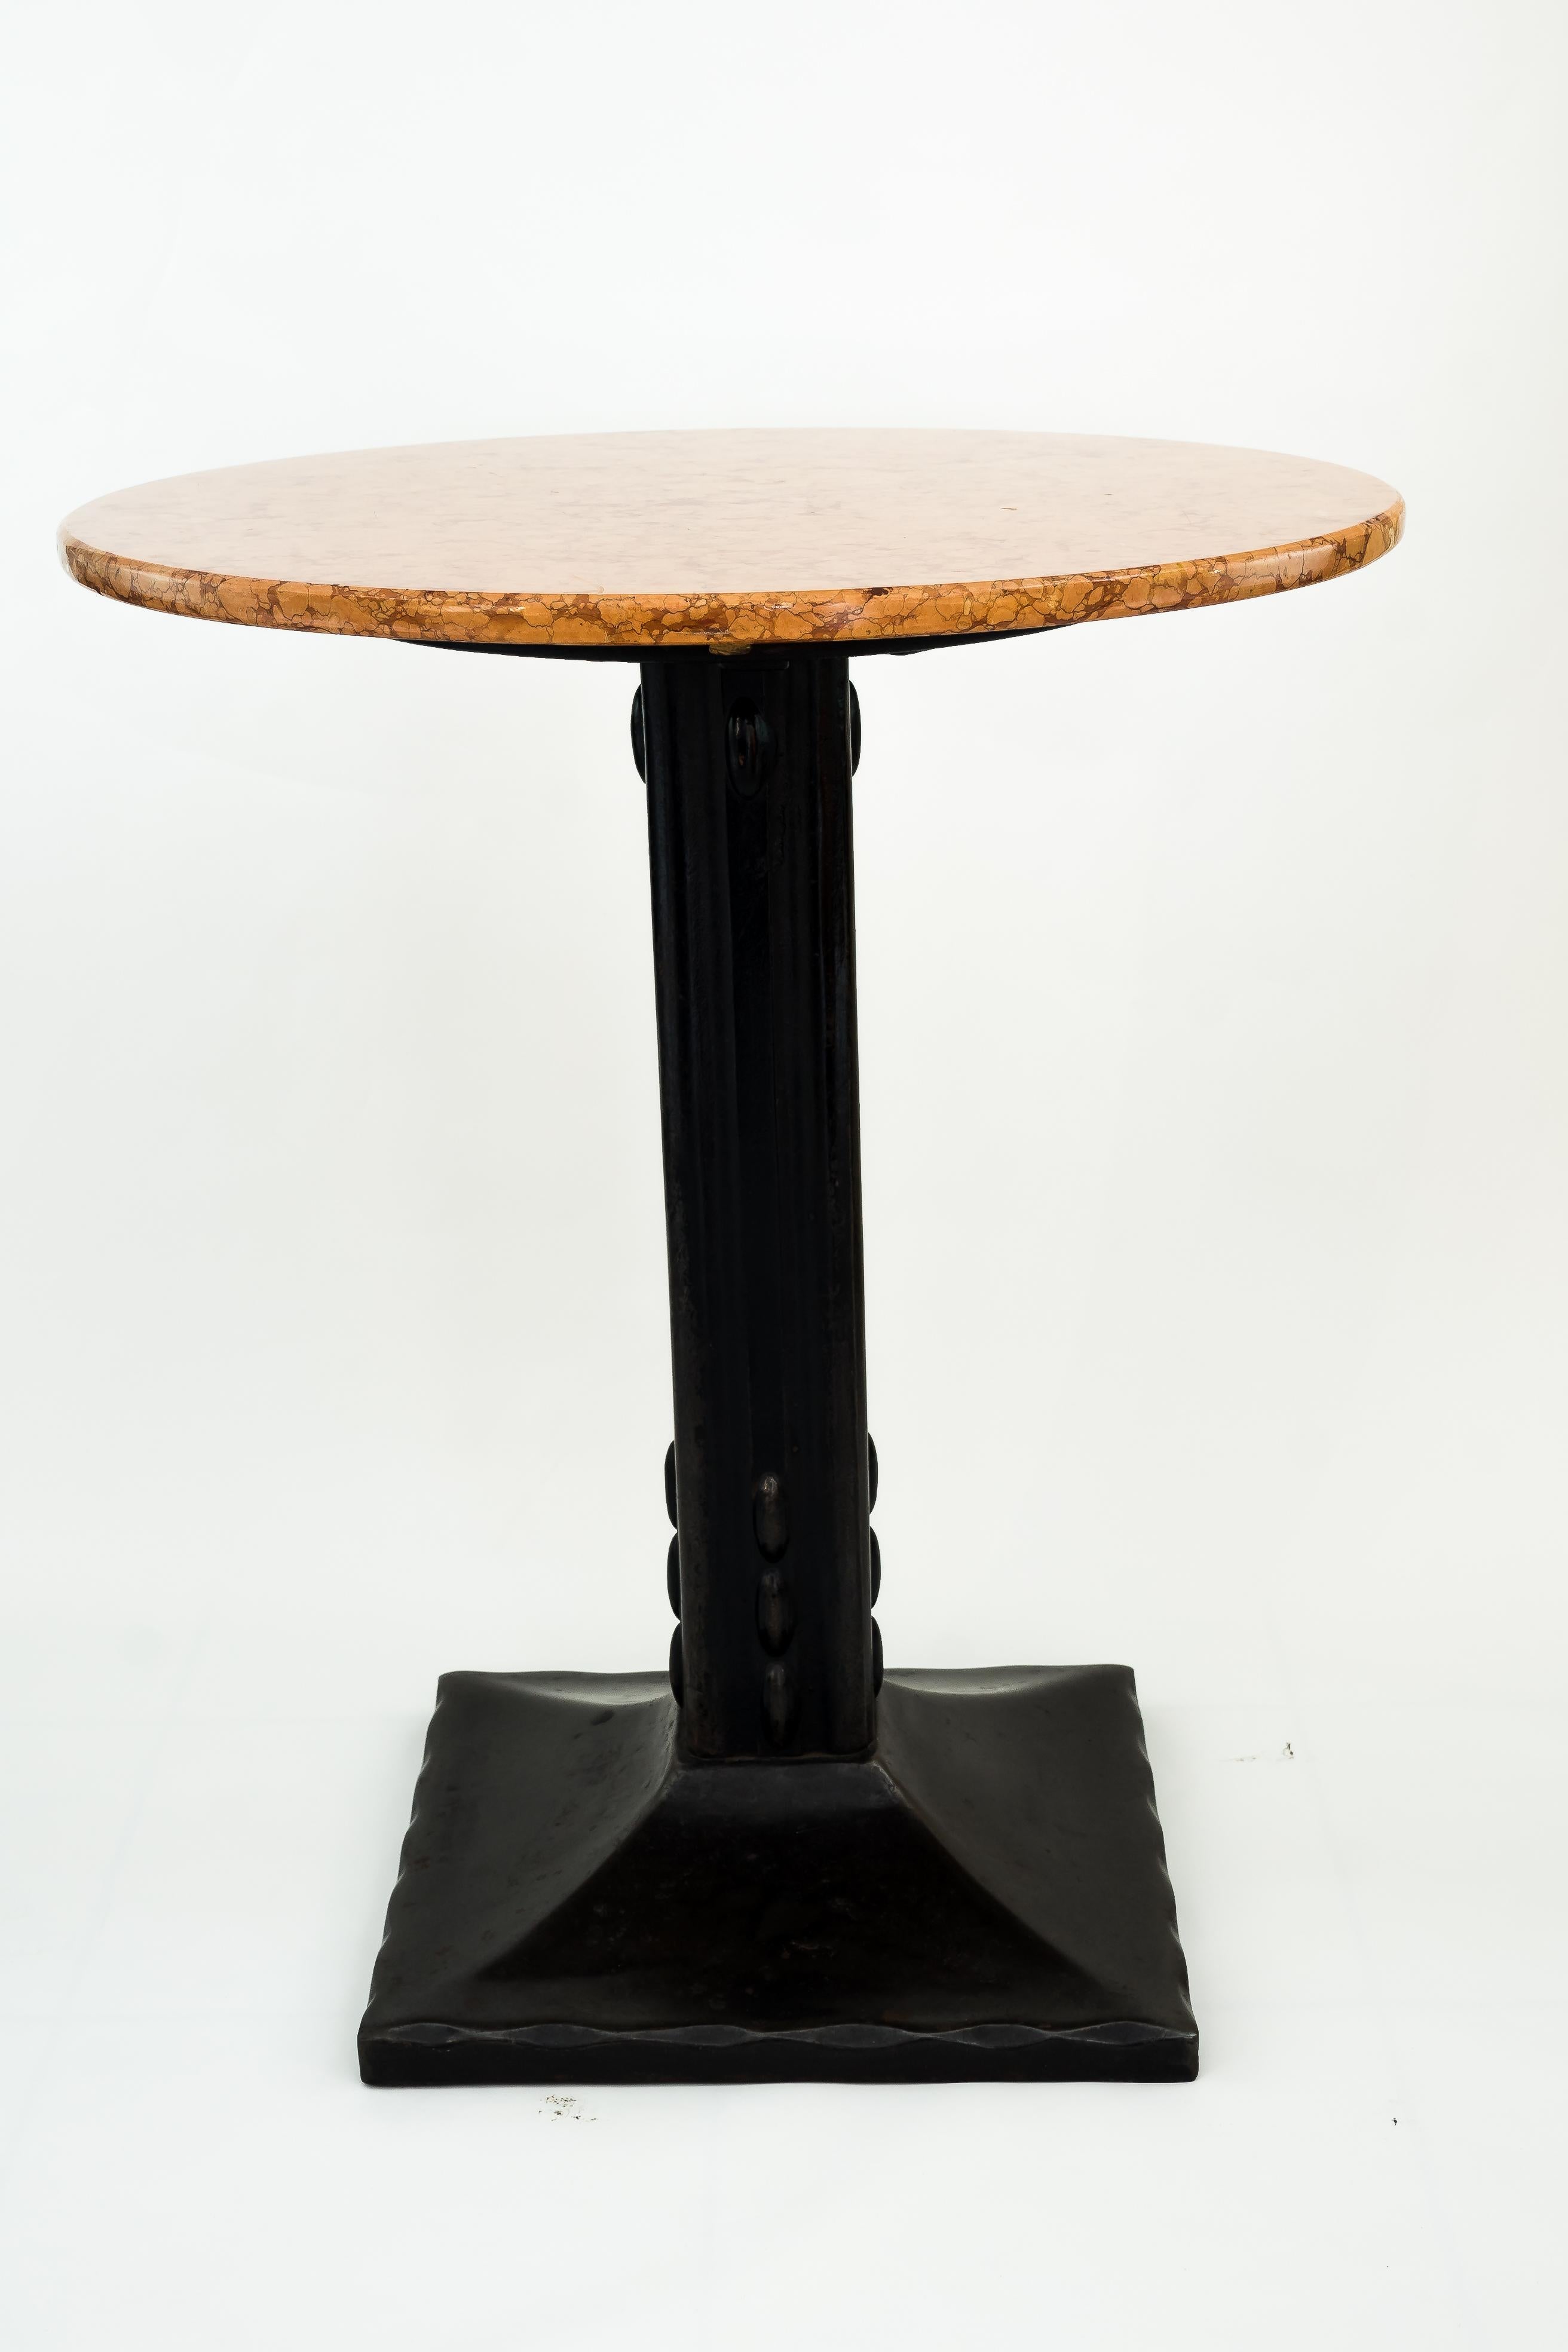 Early 20th Century Art Deco Coffee House Table Attr. to Josef Hoffmann For Sale